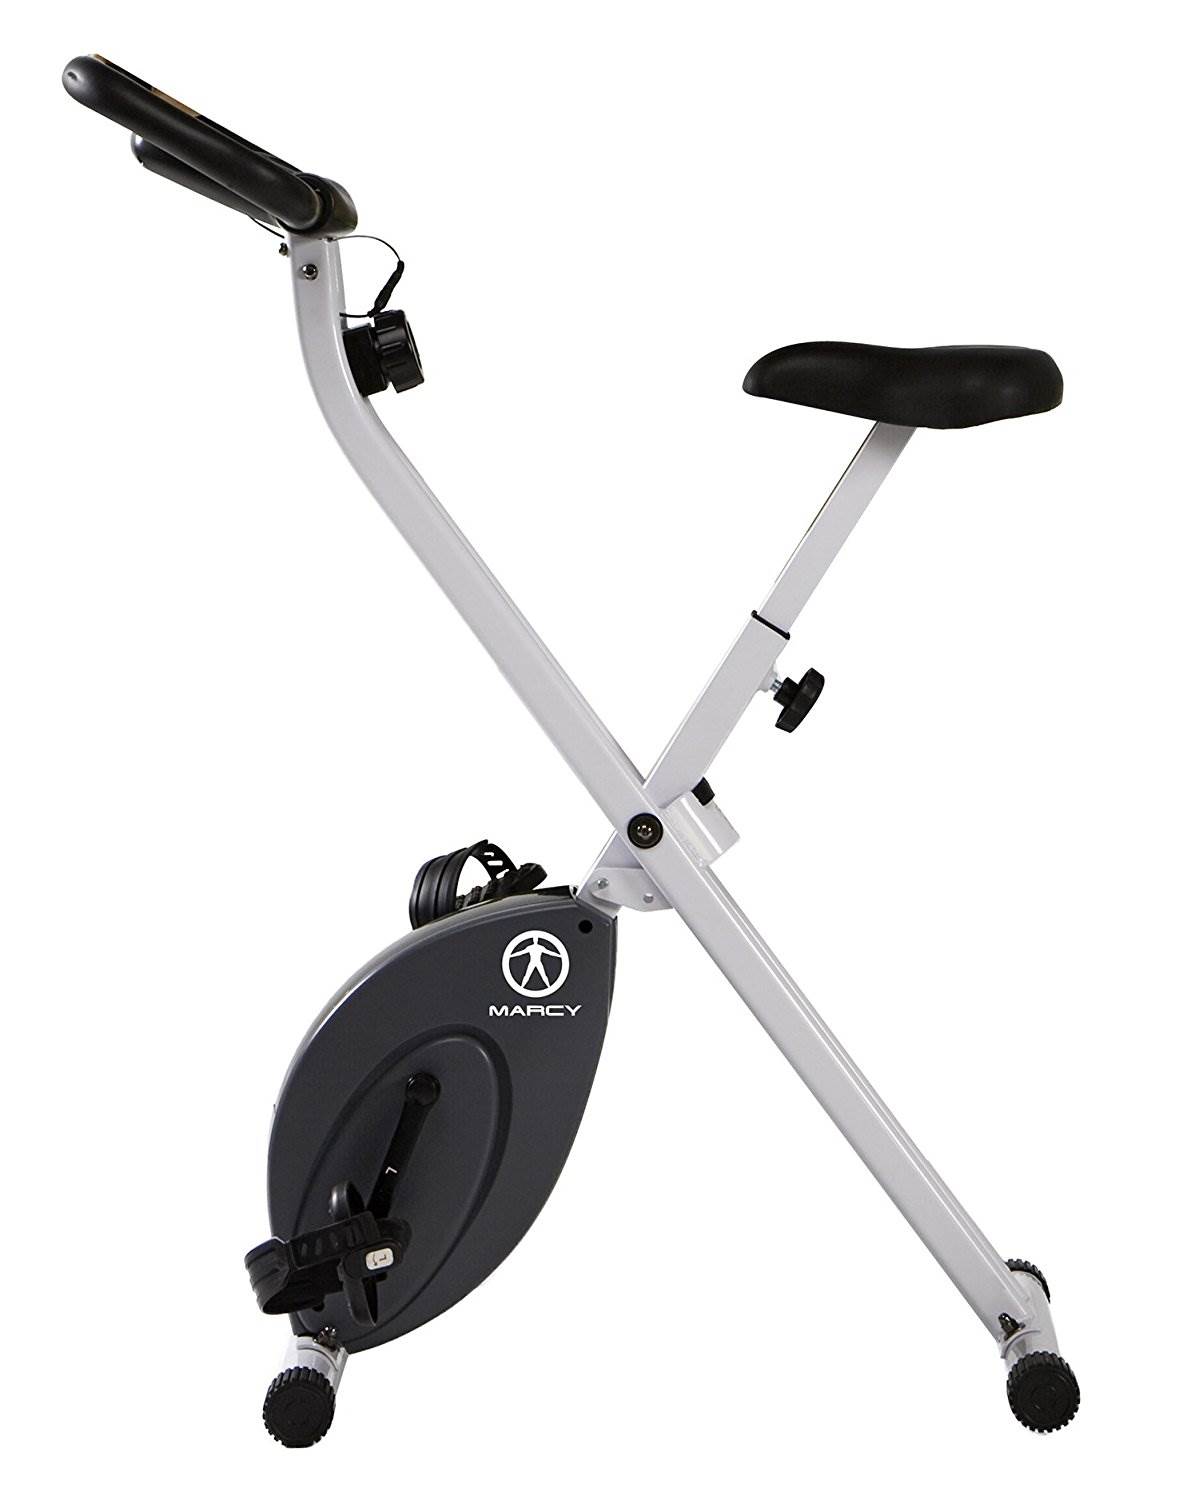 Marcy Foldable Exercise Bike Compact Cycling NS-652 - image 1 of 8